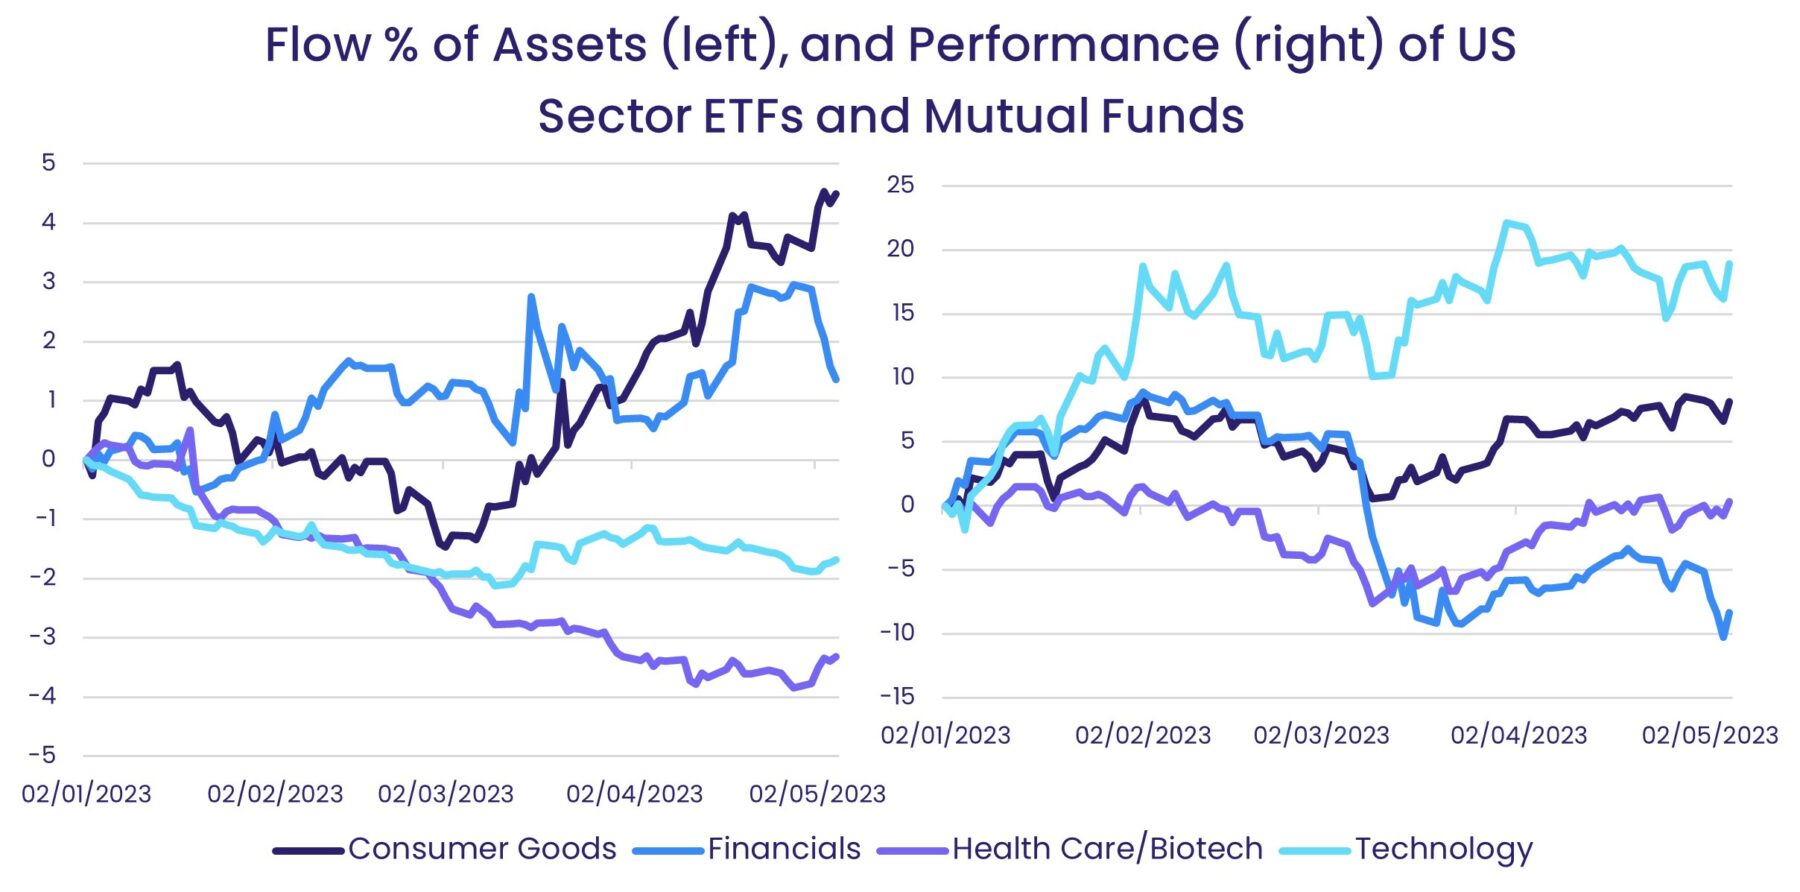 Image of a chart representing "Flow % of Assets (left), and Performance (right) of US Sector ETFs and Mutual Funds"